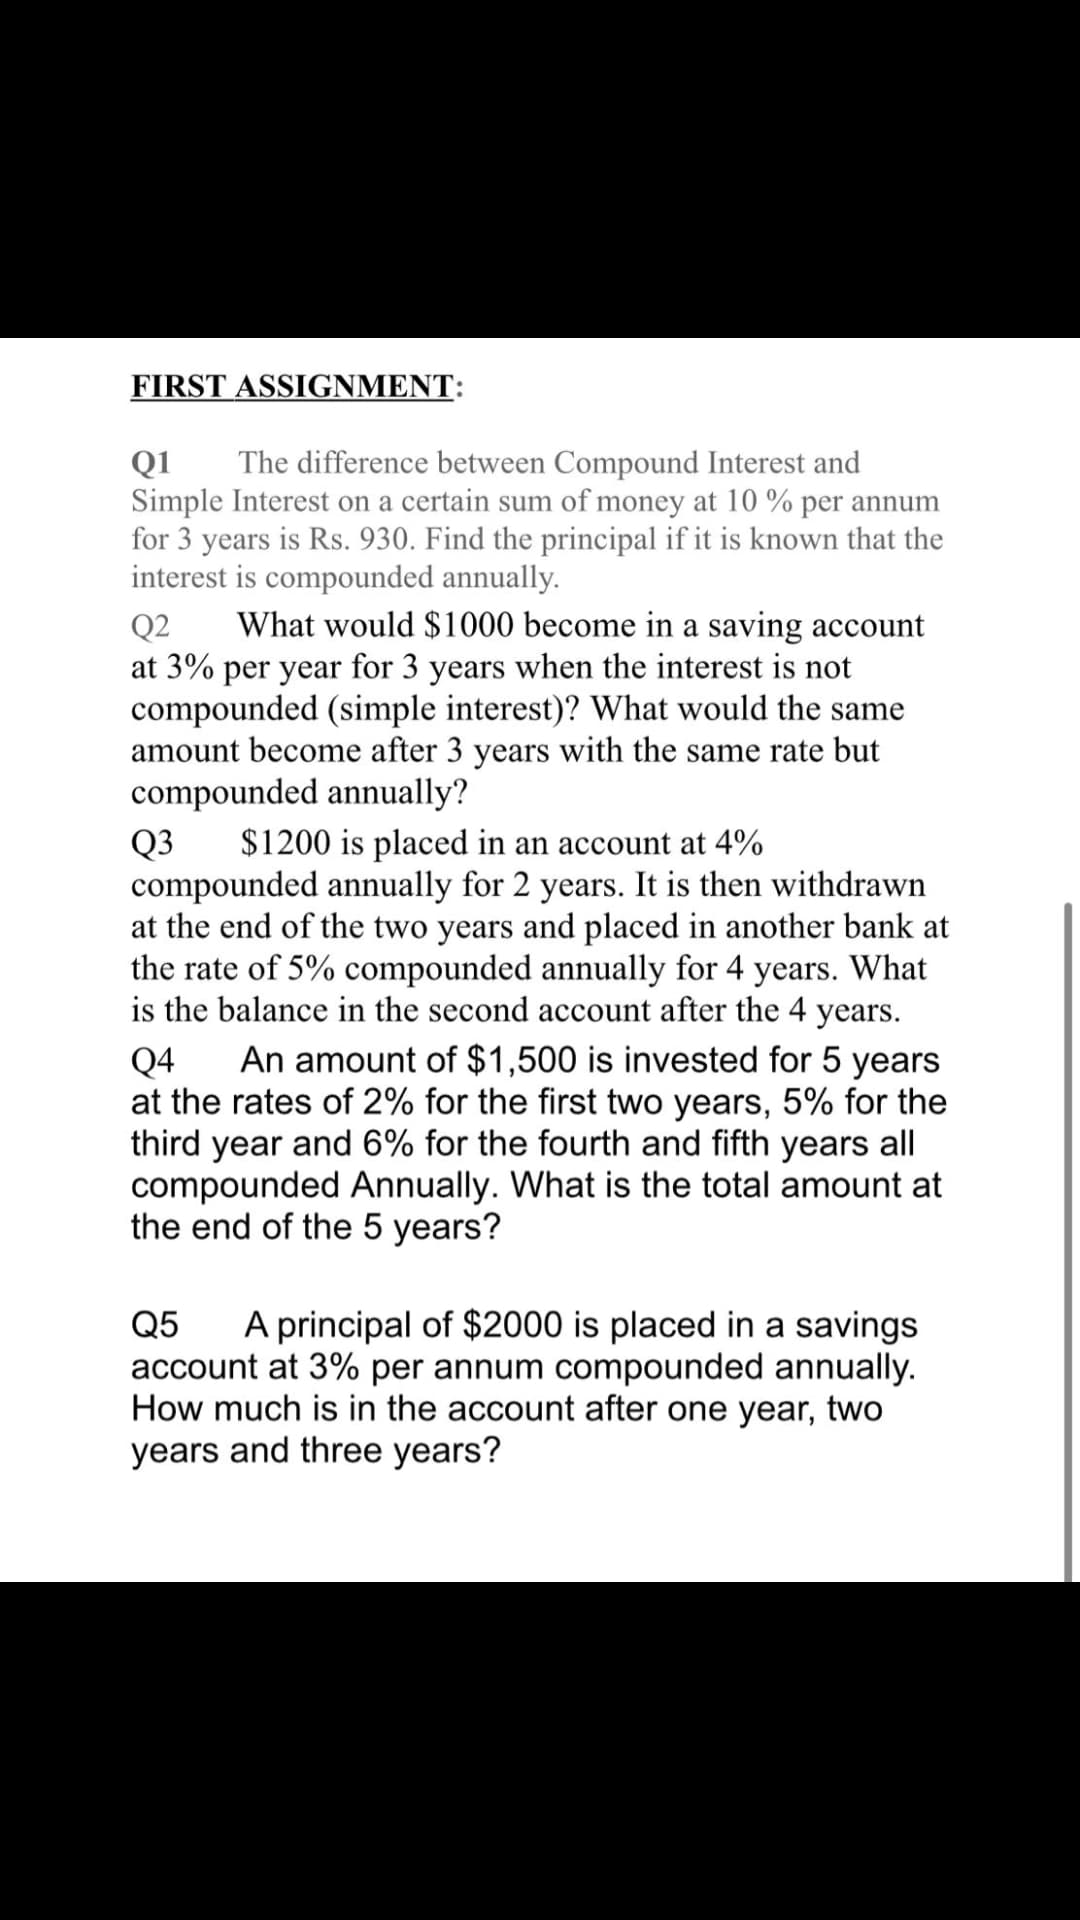 FIRST ASSIGNMENT:
The difference between Compound Interest and
Q1
Simple Interest on a certain sum of money at 10 % per annum
for 3 years is Rs. 930. Find the principal if it is known that the
interest is compounded annually.
What would $1000 become in a saving account
Q2
at 3% per year for 3 years when the interest is not
compounded (simple interest)? What would the same
amount become after 3 years with the same rate but
compounded annually?
$1200 is placed in an account at 4%
Q3
compounded annually for 2 years. It is then withdrawn
at the end of the two years and placed in another bank at
the rate of 5% compounded annually for 4 years. What
is the balance in the second account after the 4 years.
An amount of $1,500 is invested for 5 years
Q4
at the rates of 2% for the first two years, 5% for the
third year and 6% for the fourth and fifth years all
compounded Annually. What is the total amount at
the end of the 5 years?
A principal of $2000 is placed in a savings
Q5
account at 3% per annum compounded annually.
How much is in the account after one year, two
years and three years?
